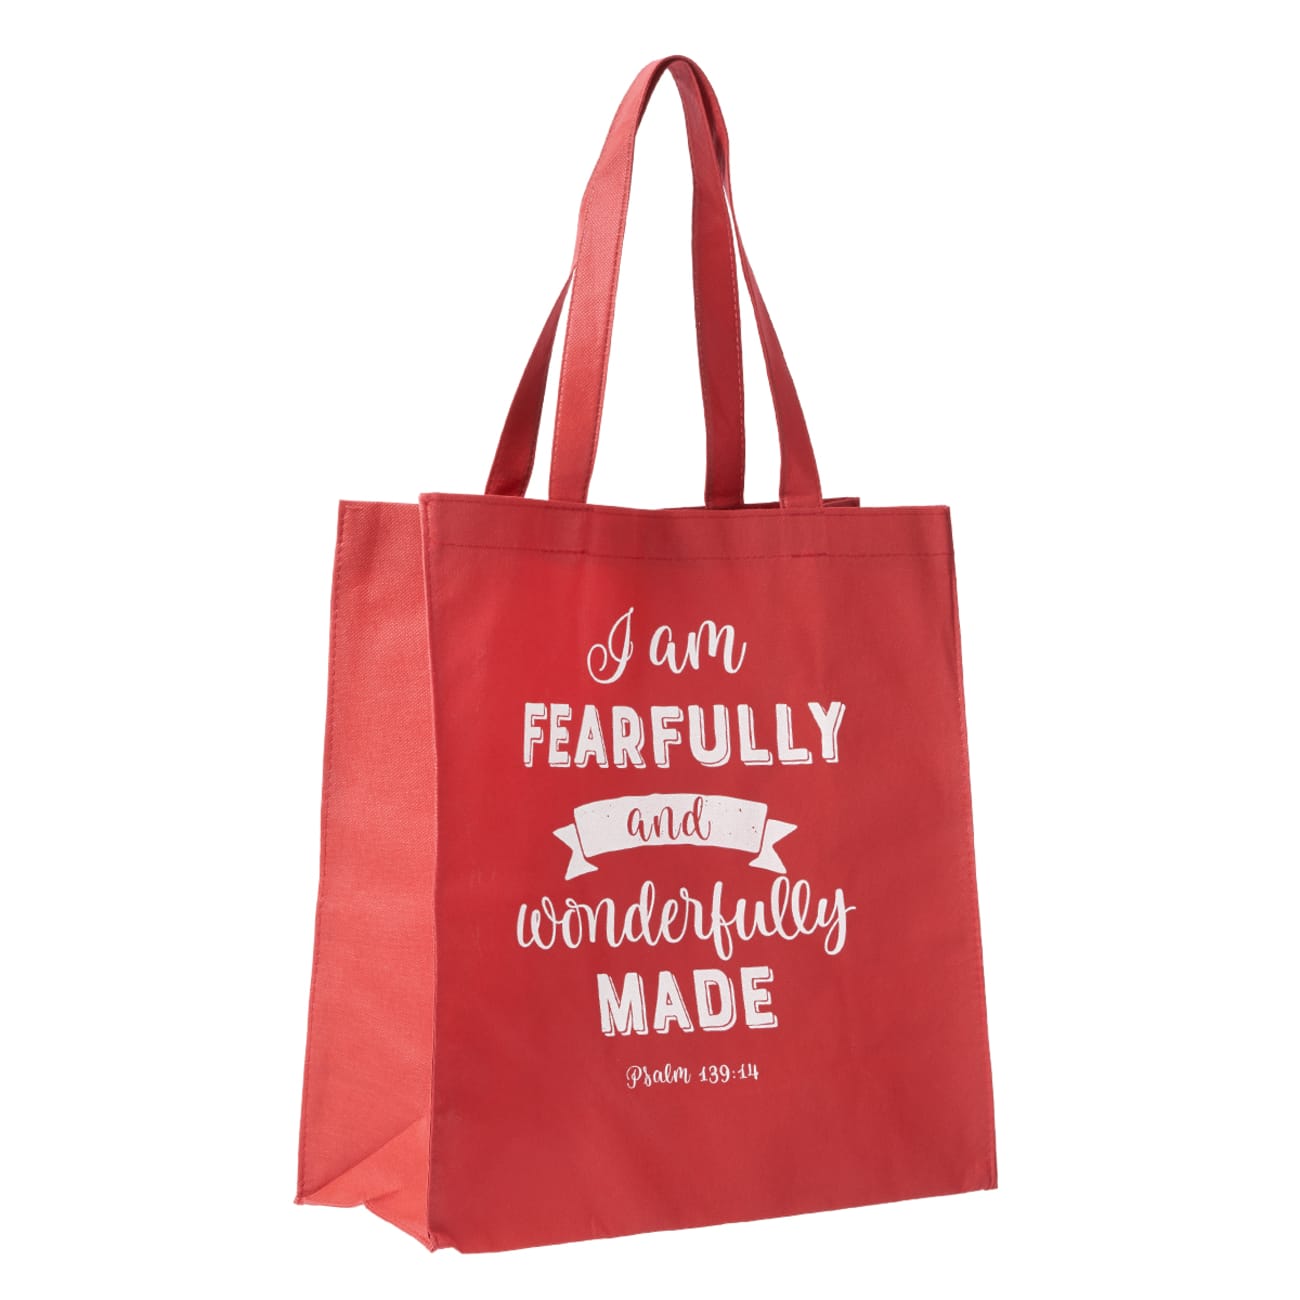 Tote Bag: I Am Fearfully and Wonderfully Made, Red/White (Psalm 139:14) Soft Goods